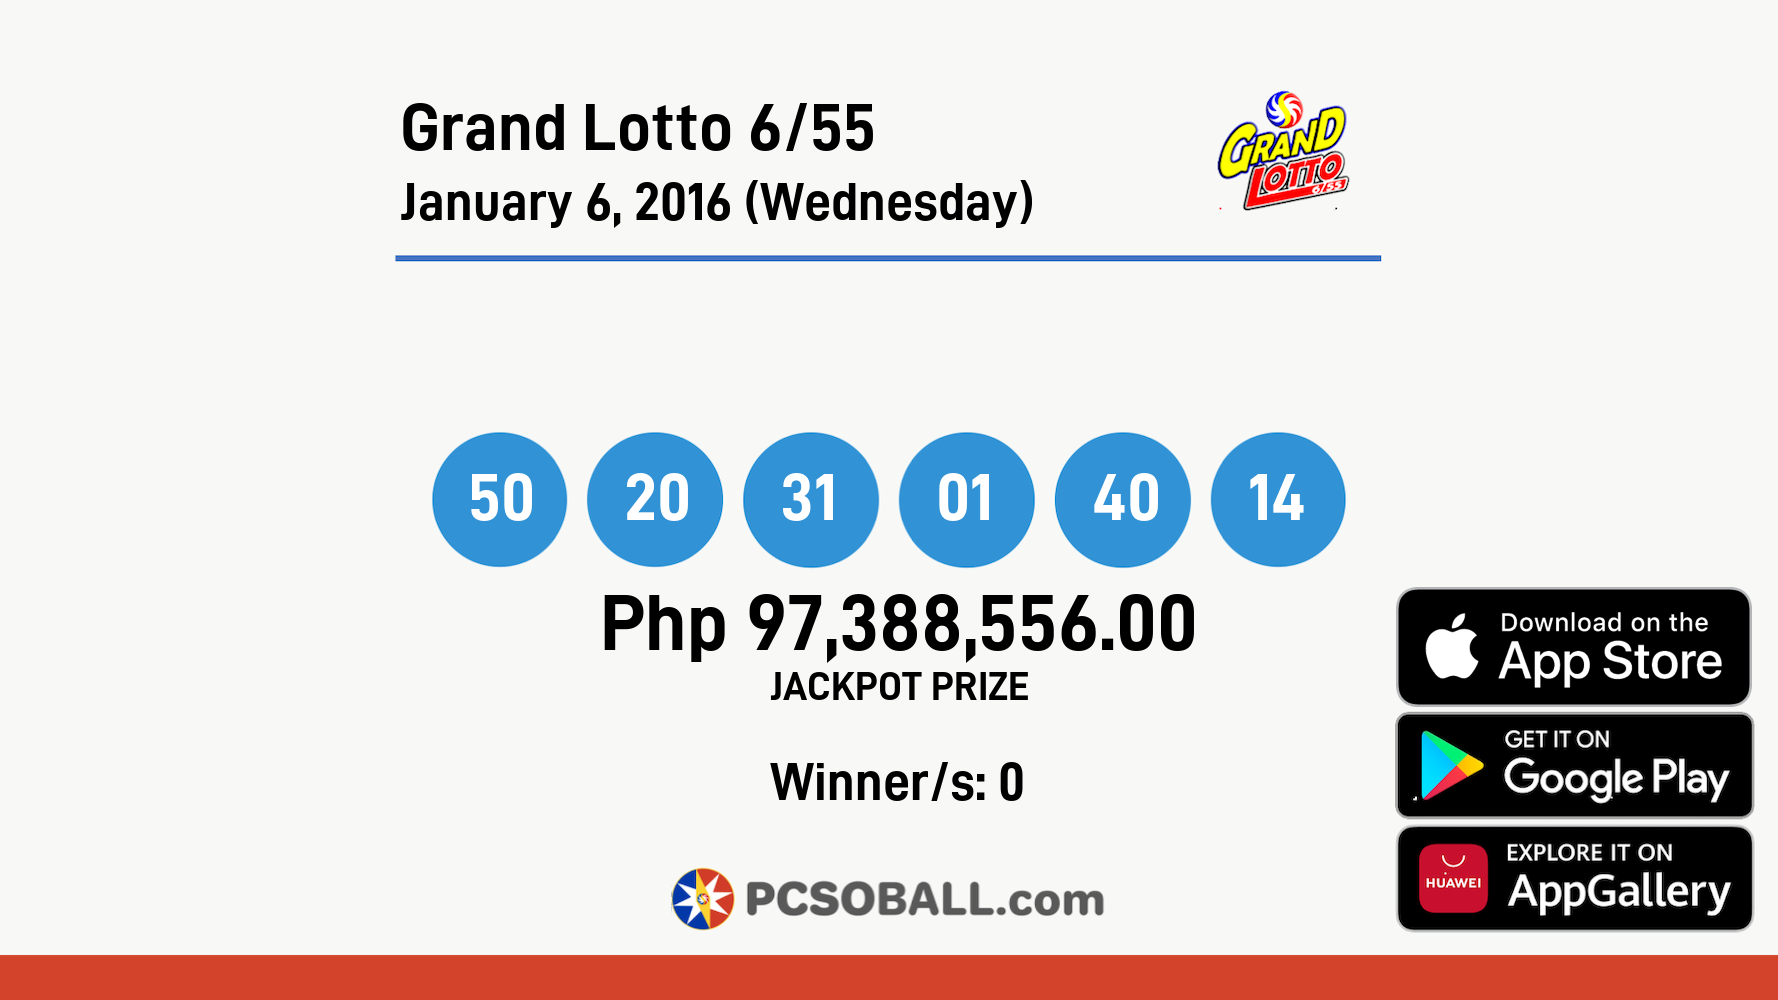 Grand Lotto 6/55 January 6, 2016 (Wednesday) Result